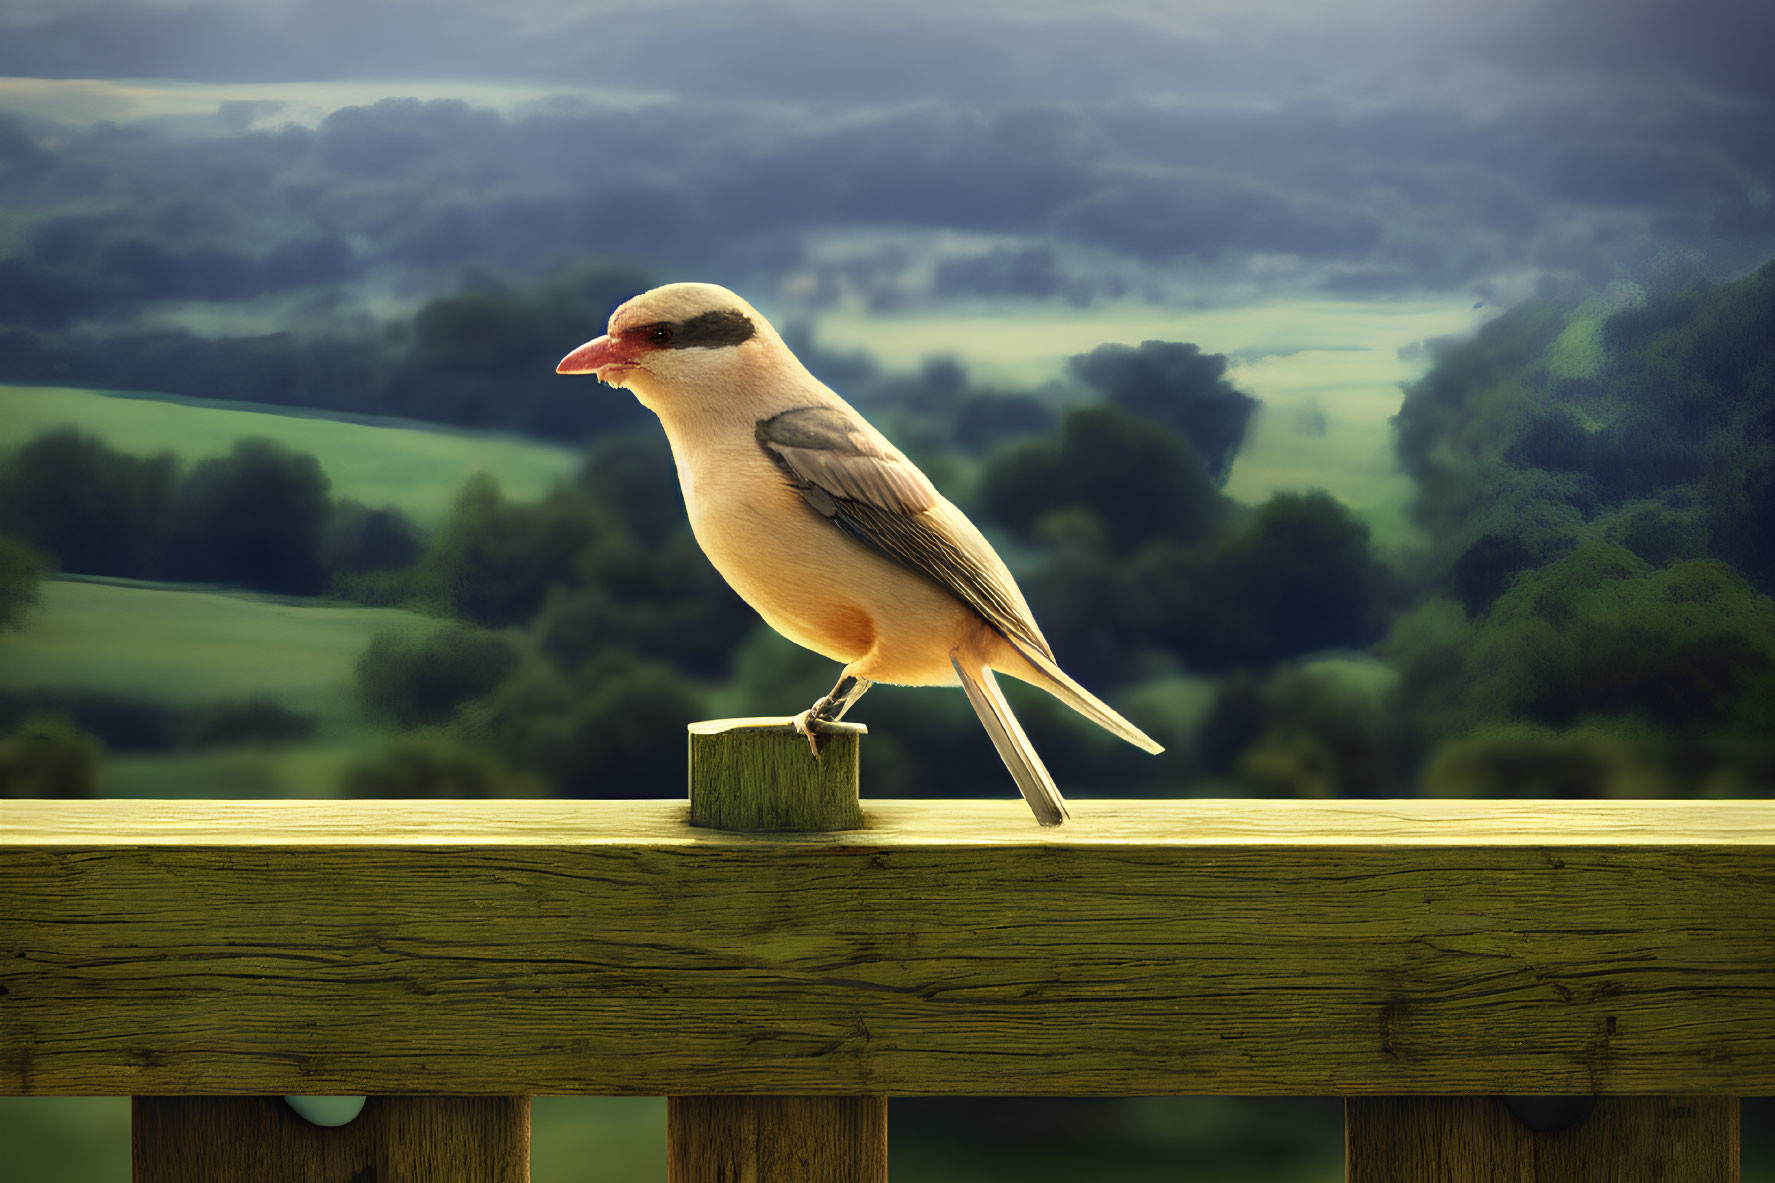 White-headed bird perched on wooden railing in scenic landscape